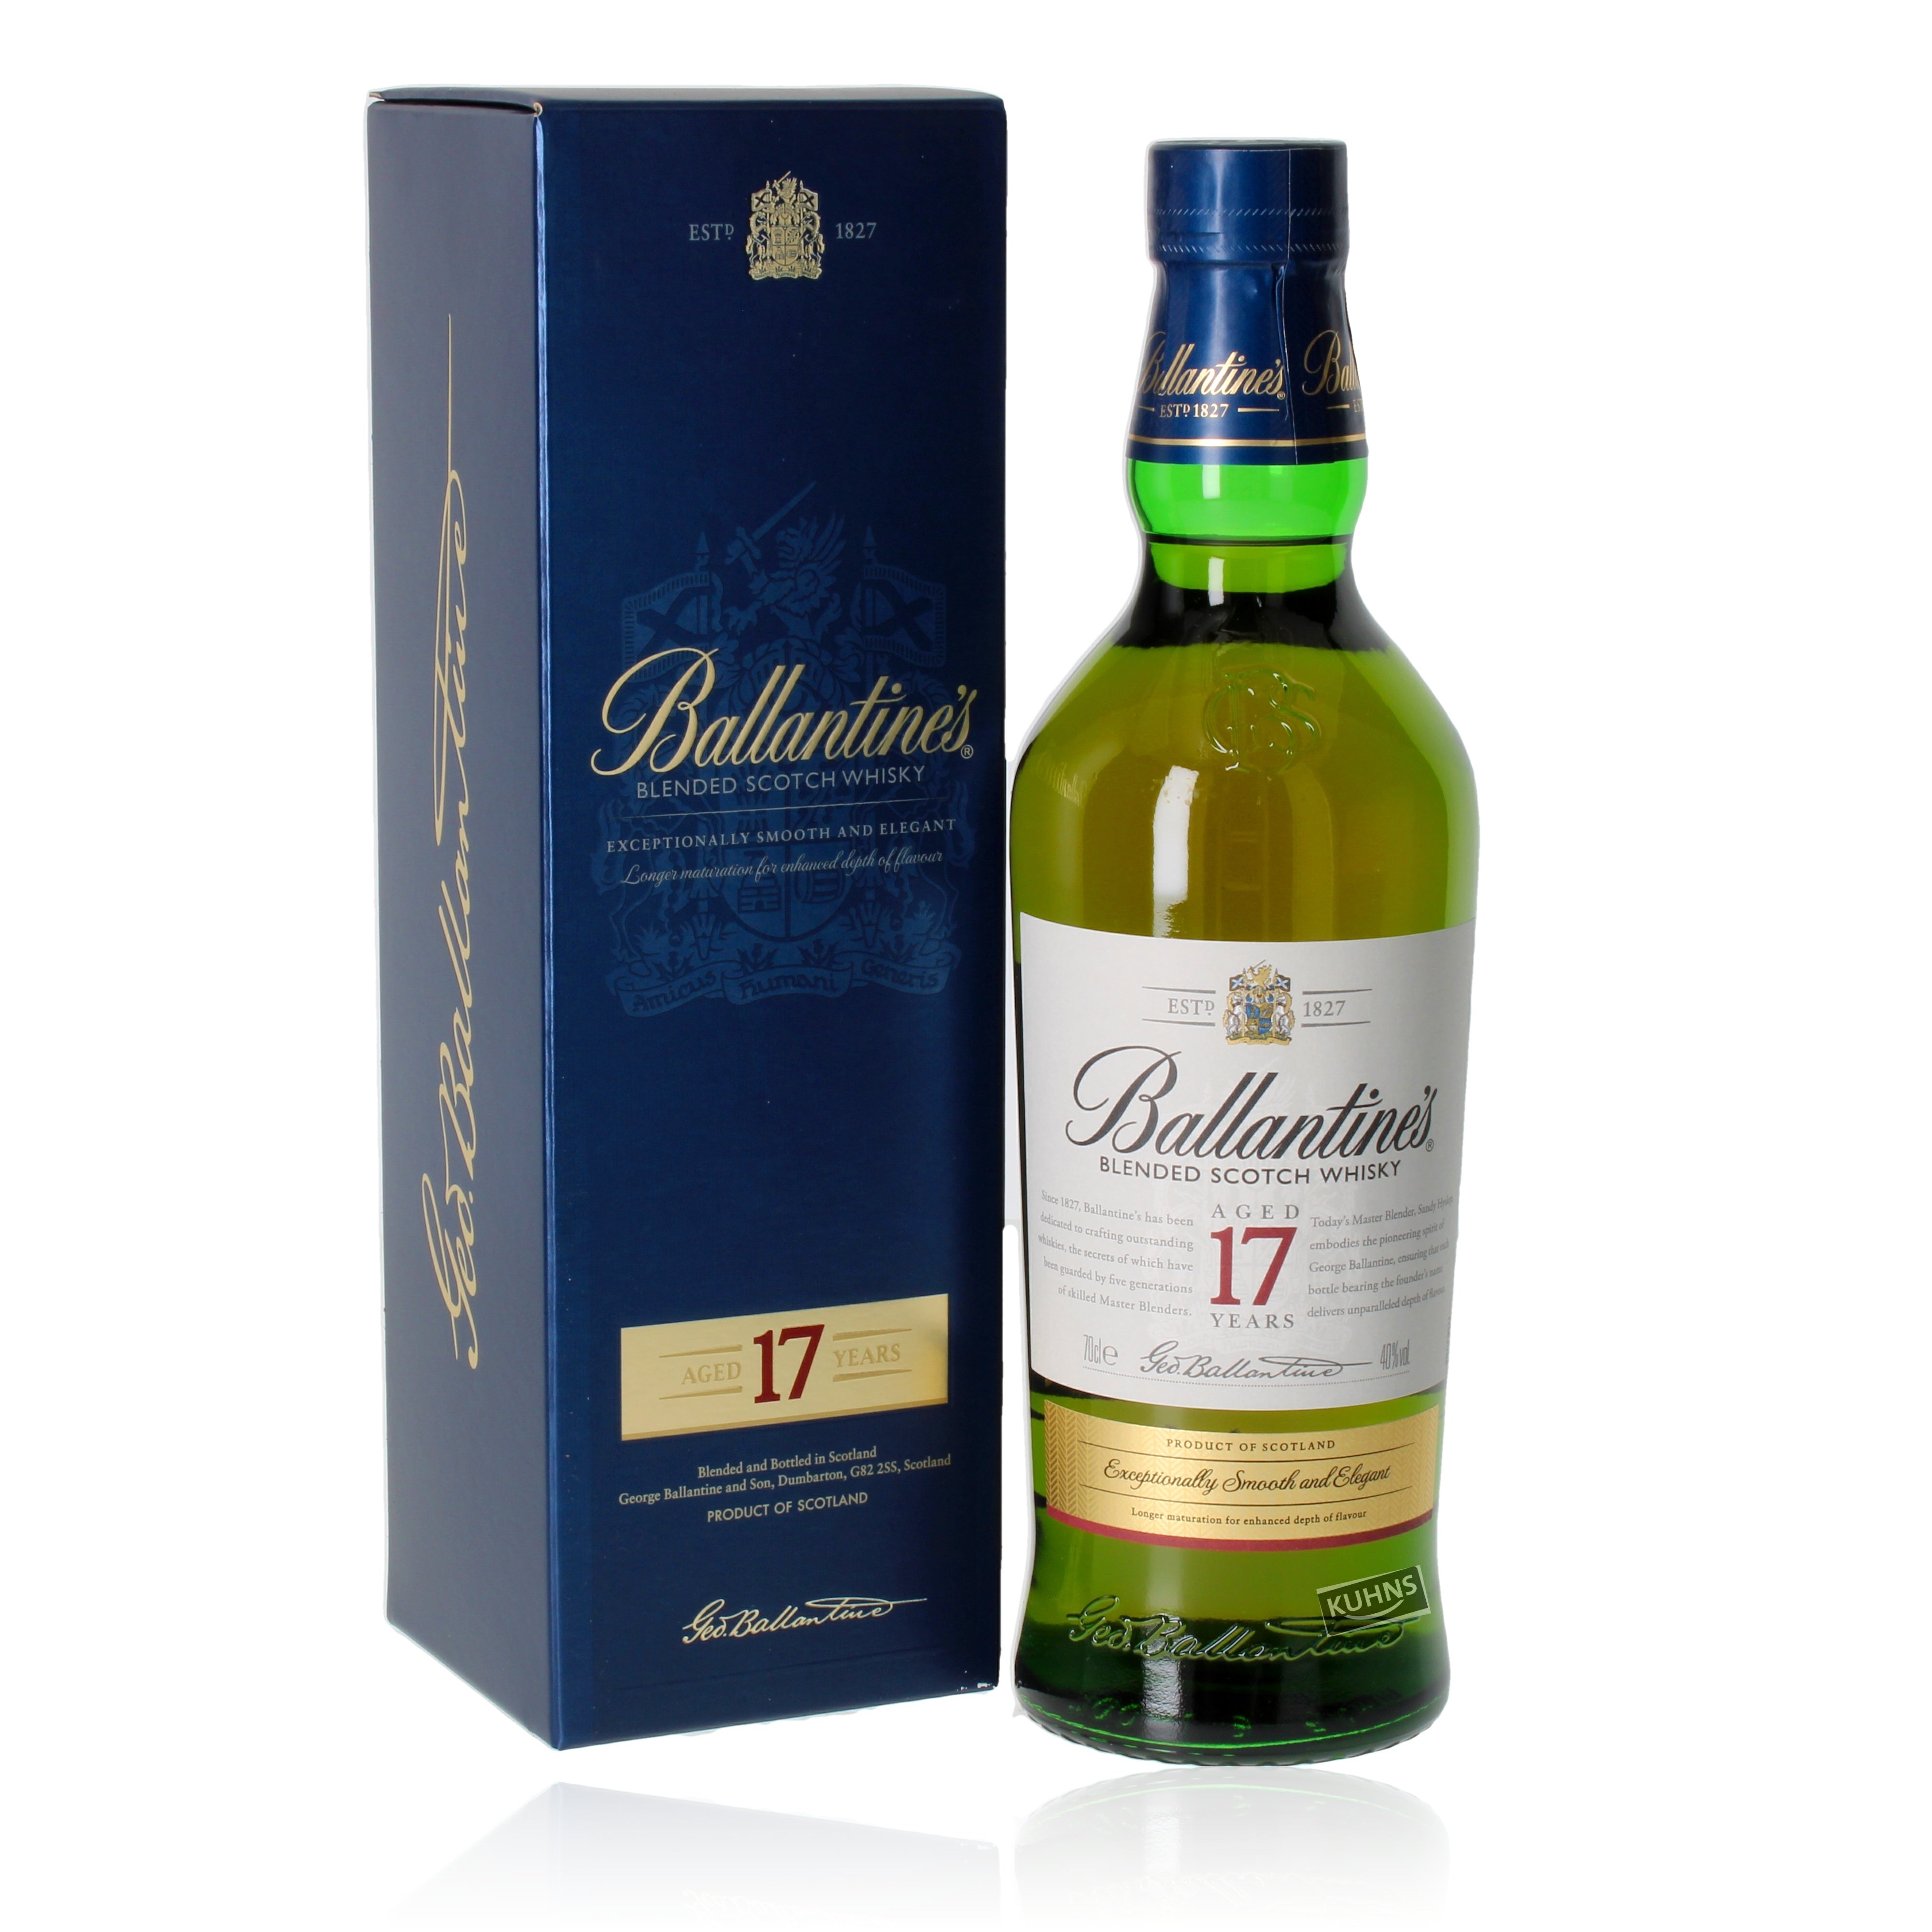 Ballantines 17 Years Blended Whiskey 0.7 alc. 40% by volume